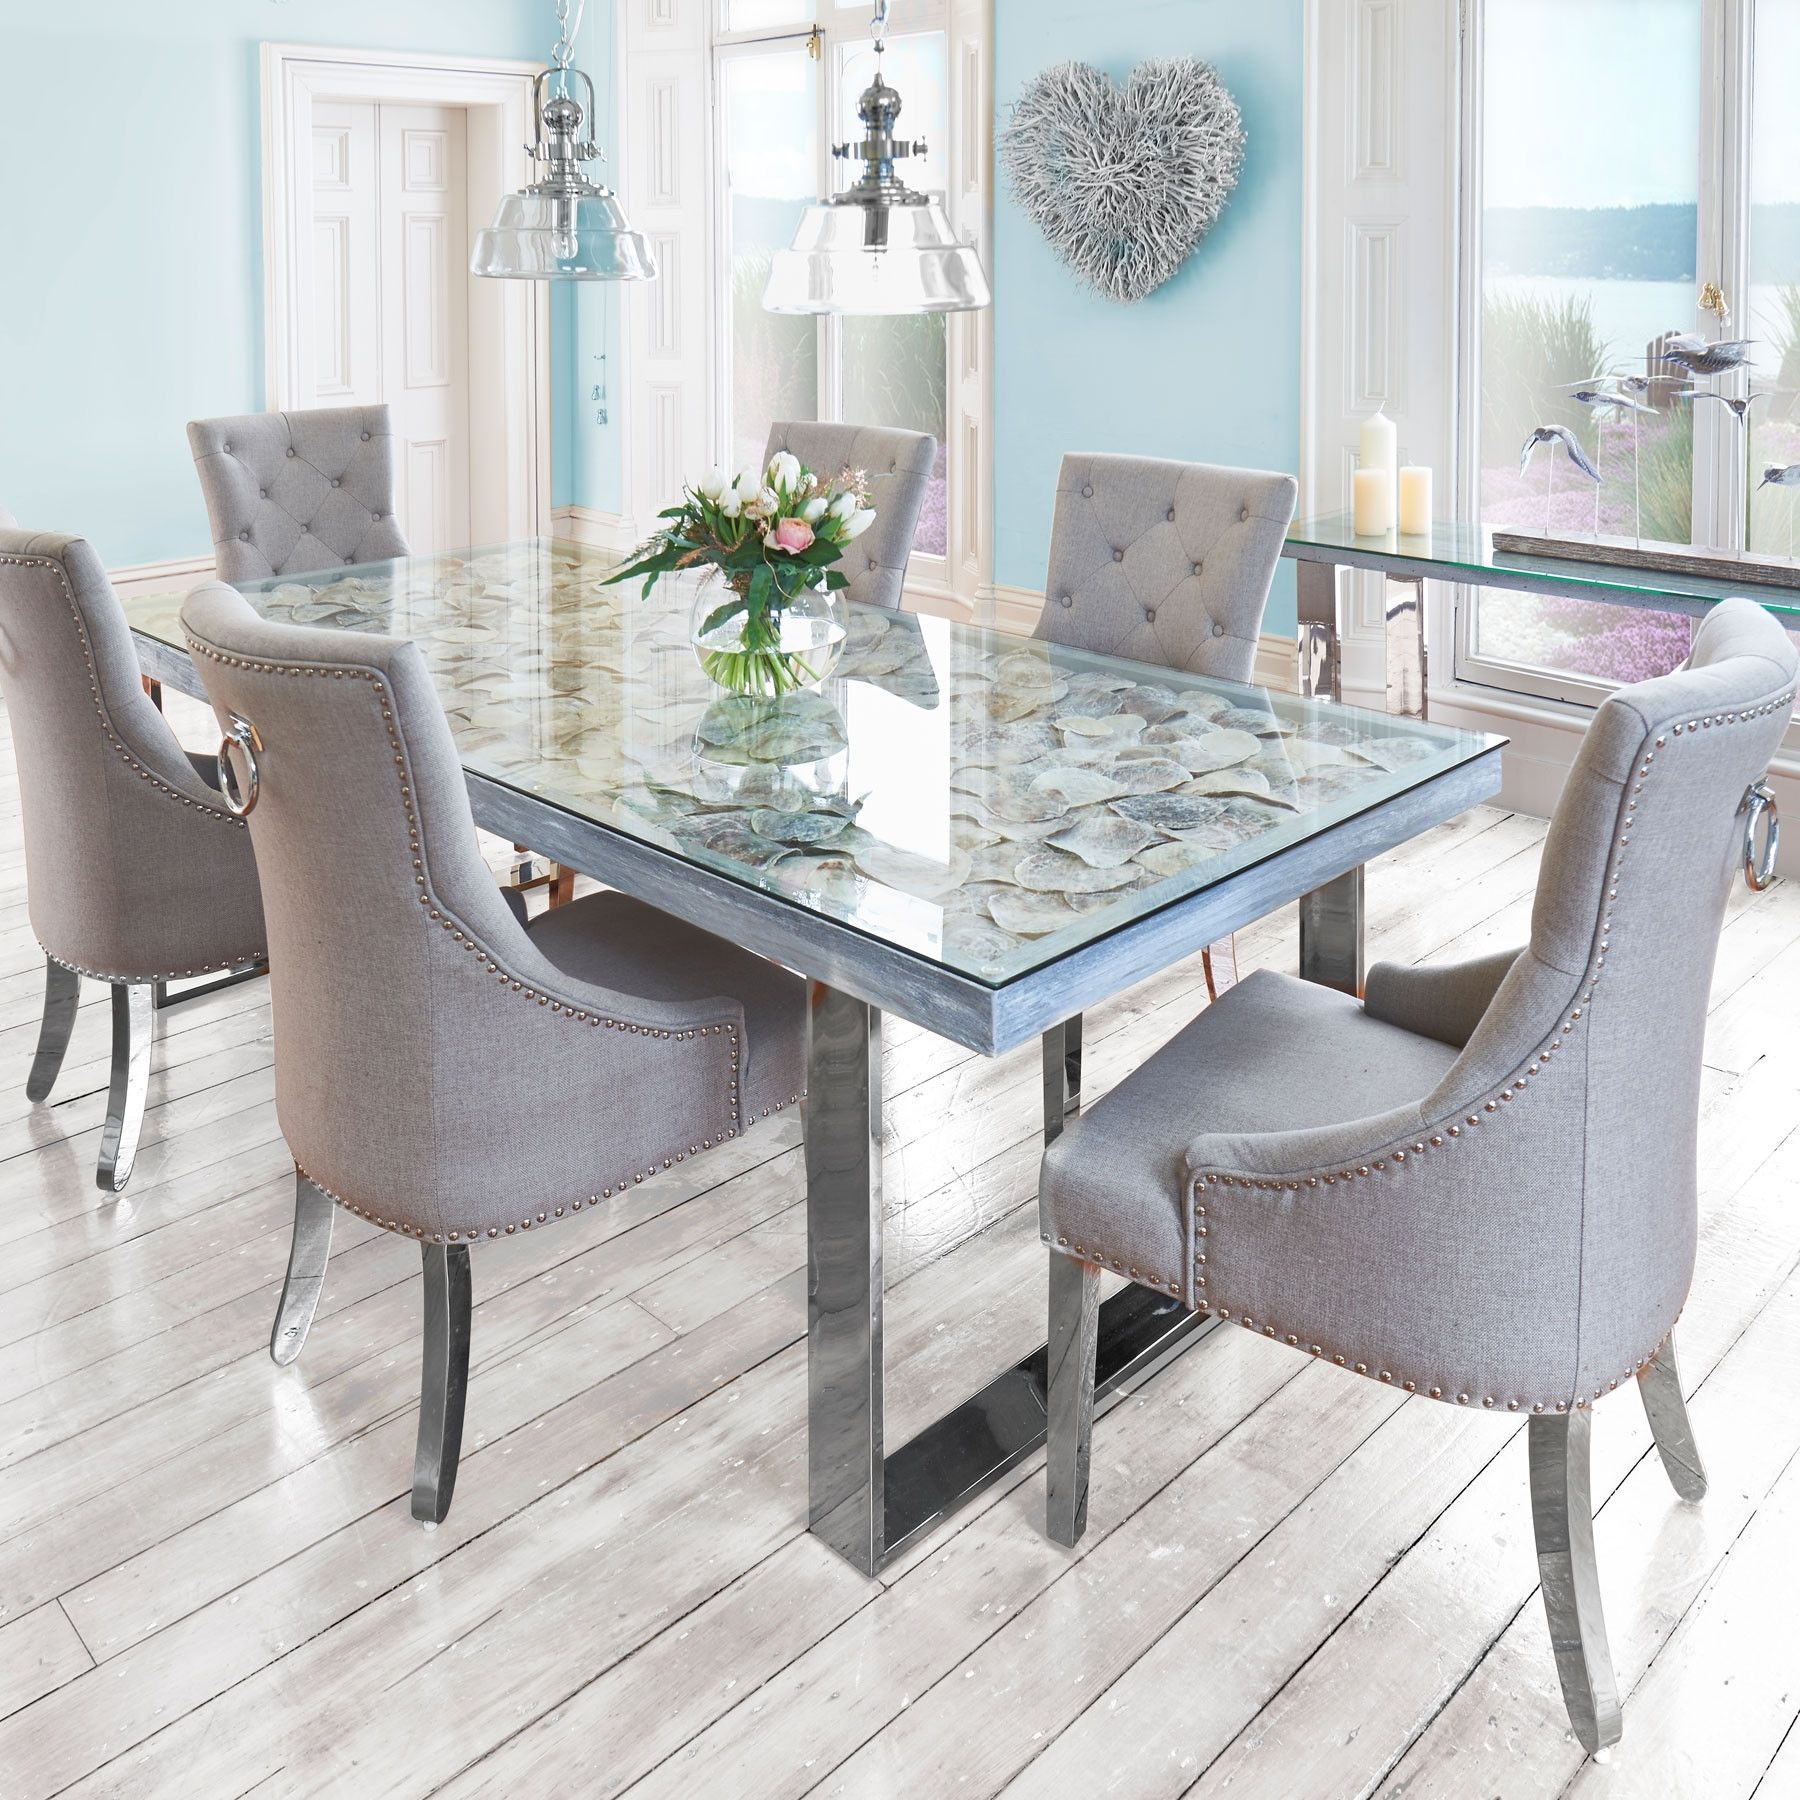 Sacramento Seashell Top Dining Table & 6 Chairs Within Widely Used Grey Dining Tables (View 11 of 25)